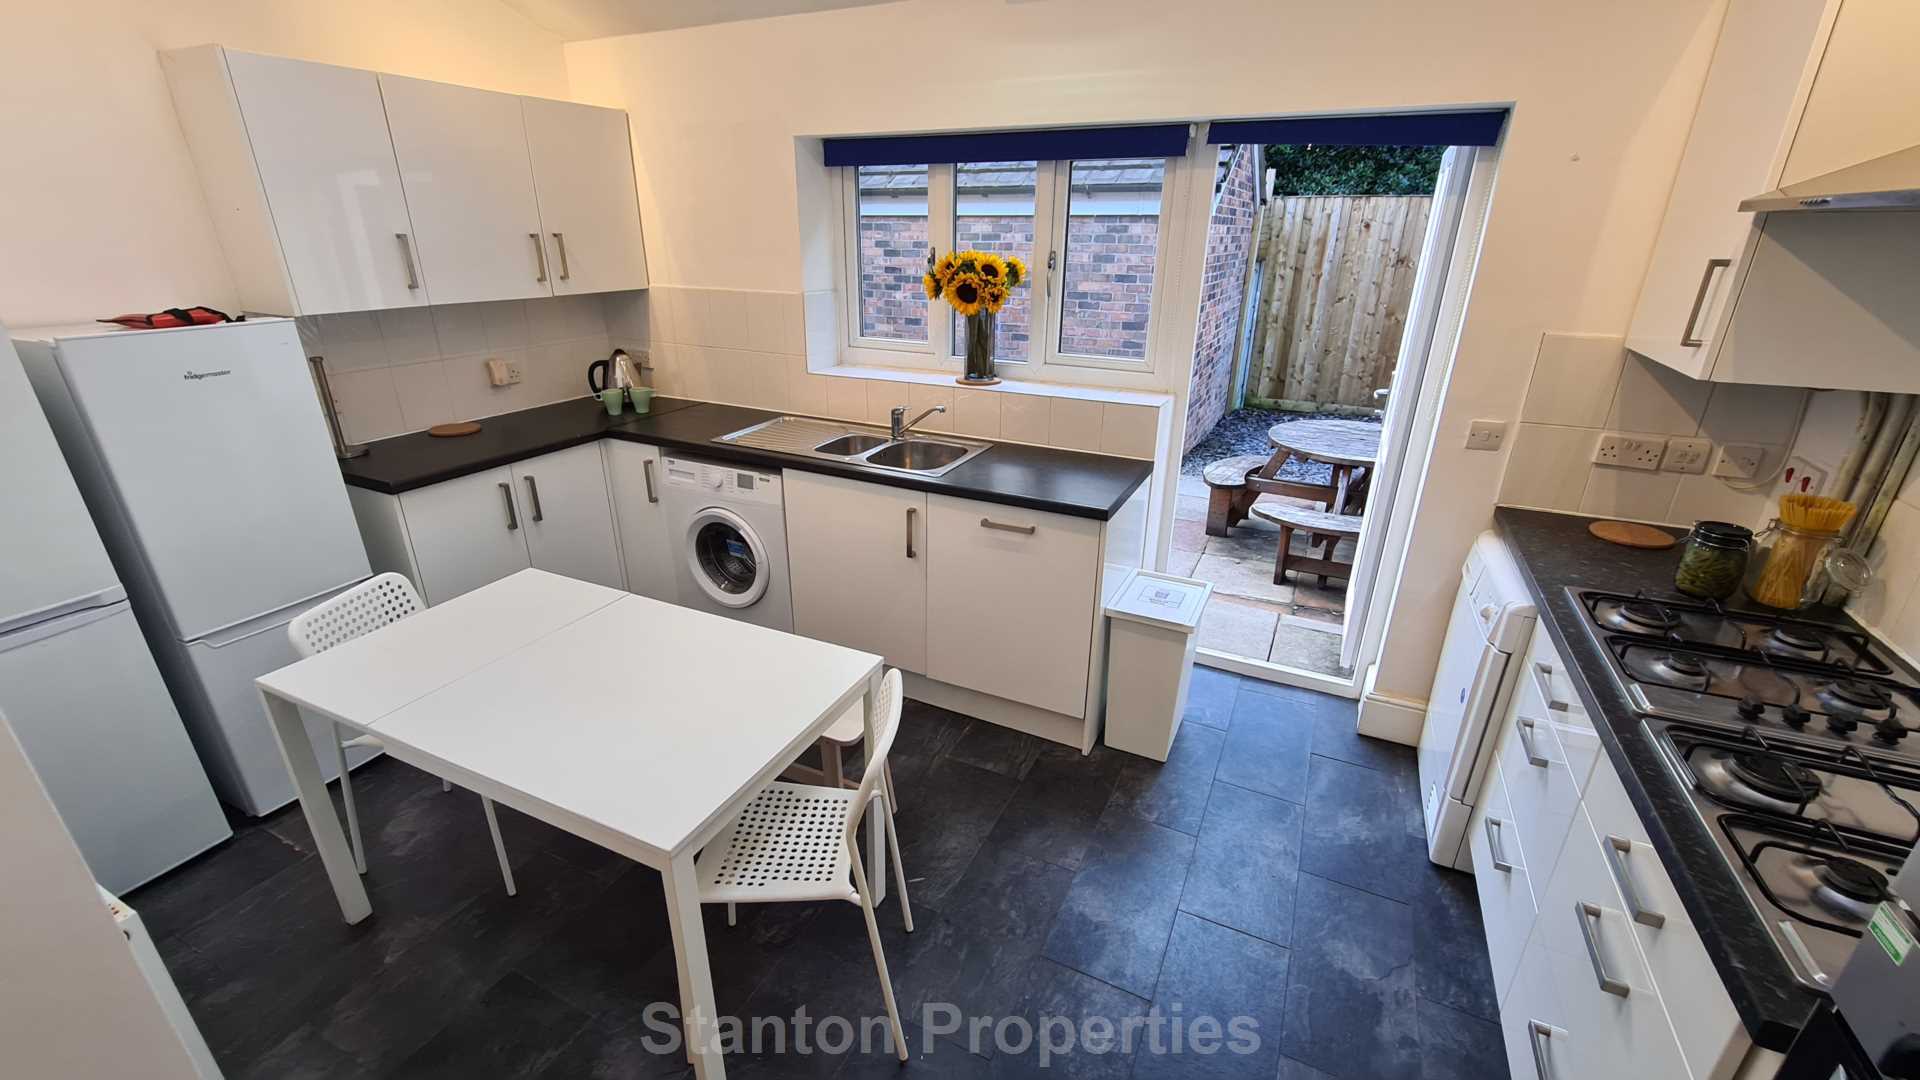 See Video Tour, £130 pppw, Albion Road, Manchester, Image 2